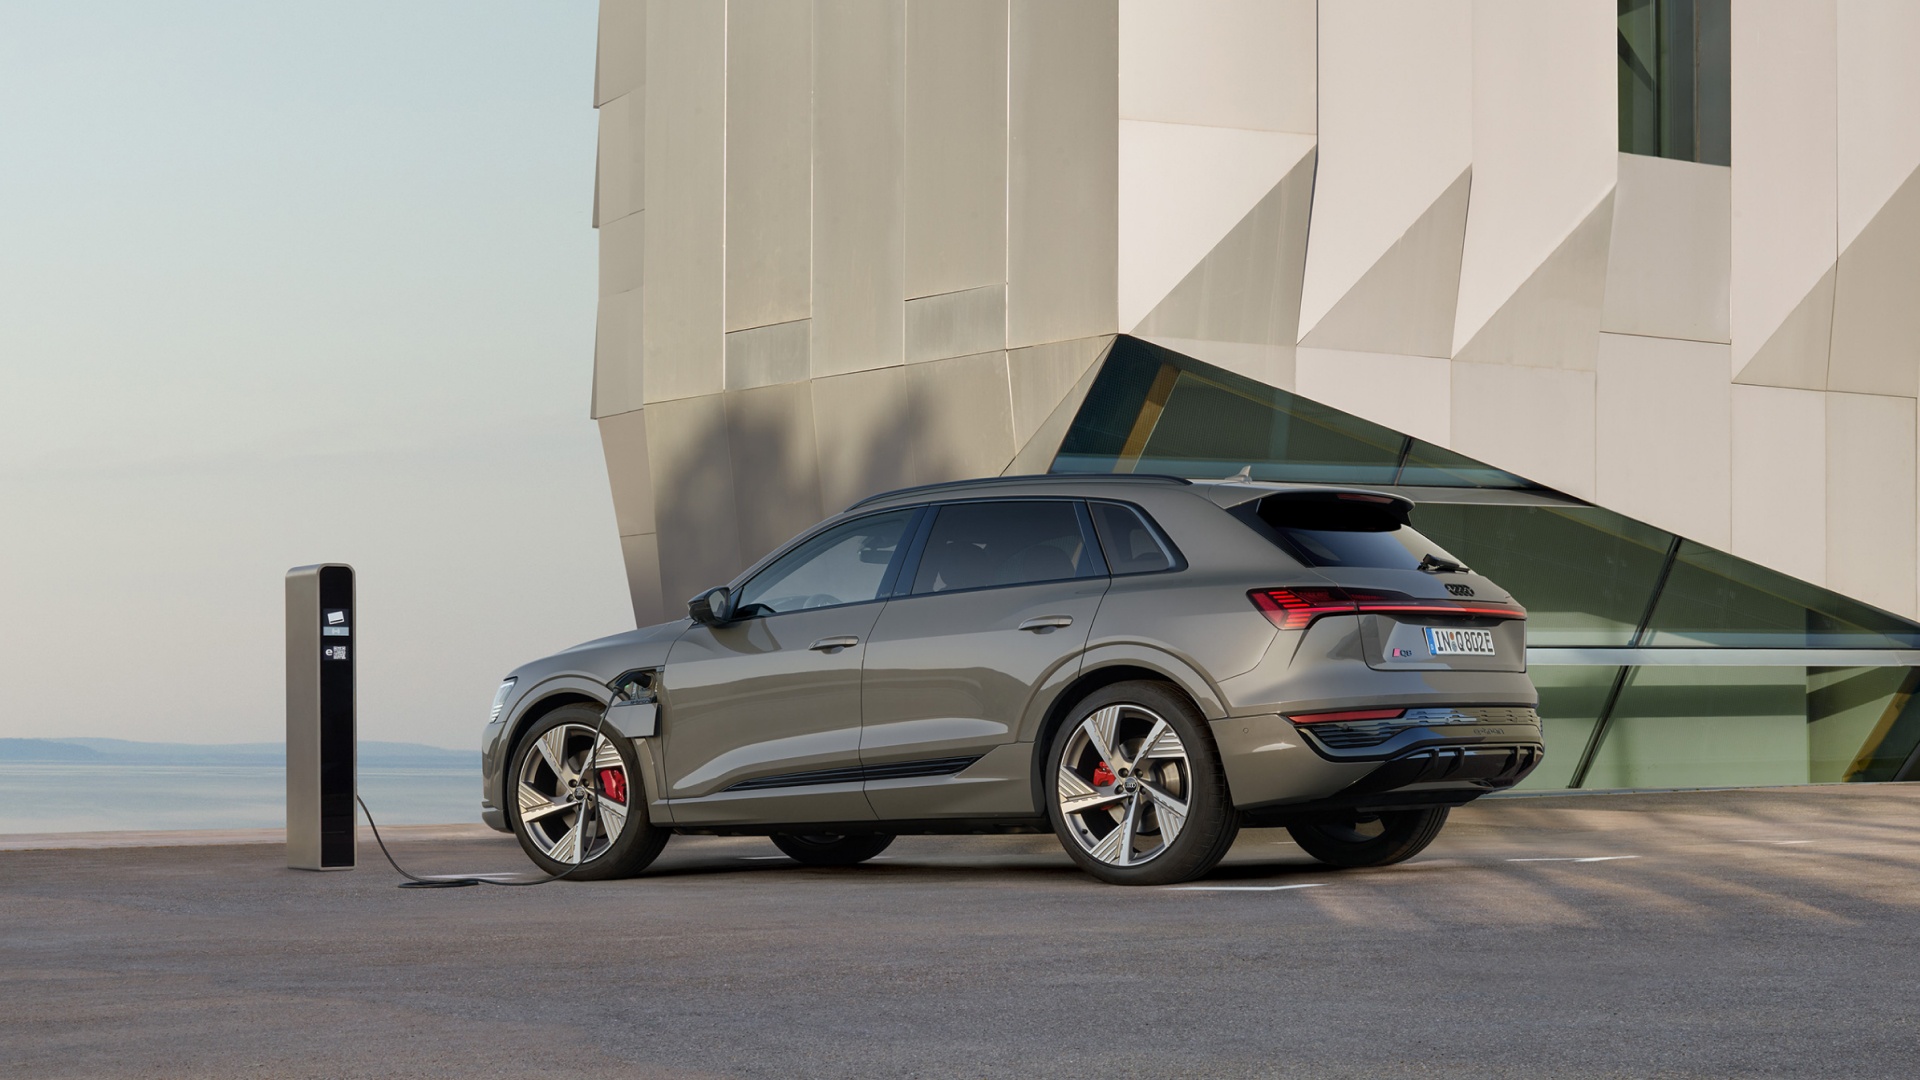 An Audi Q8 e-tron{ft_q8-e-tron} SUV charging in front of a building.